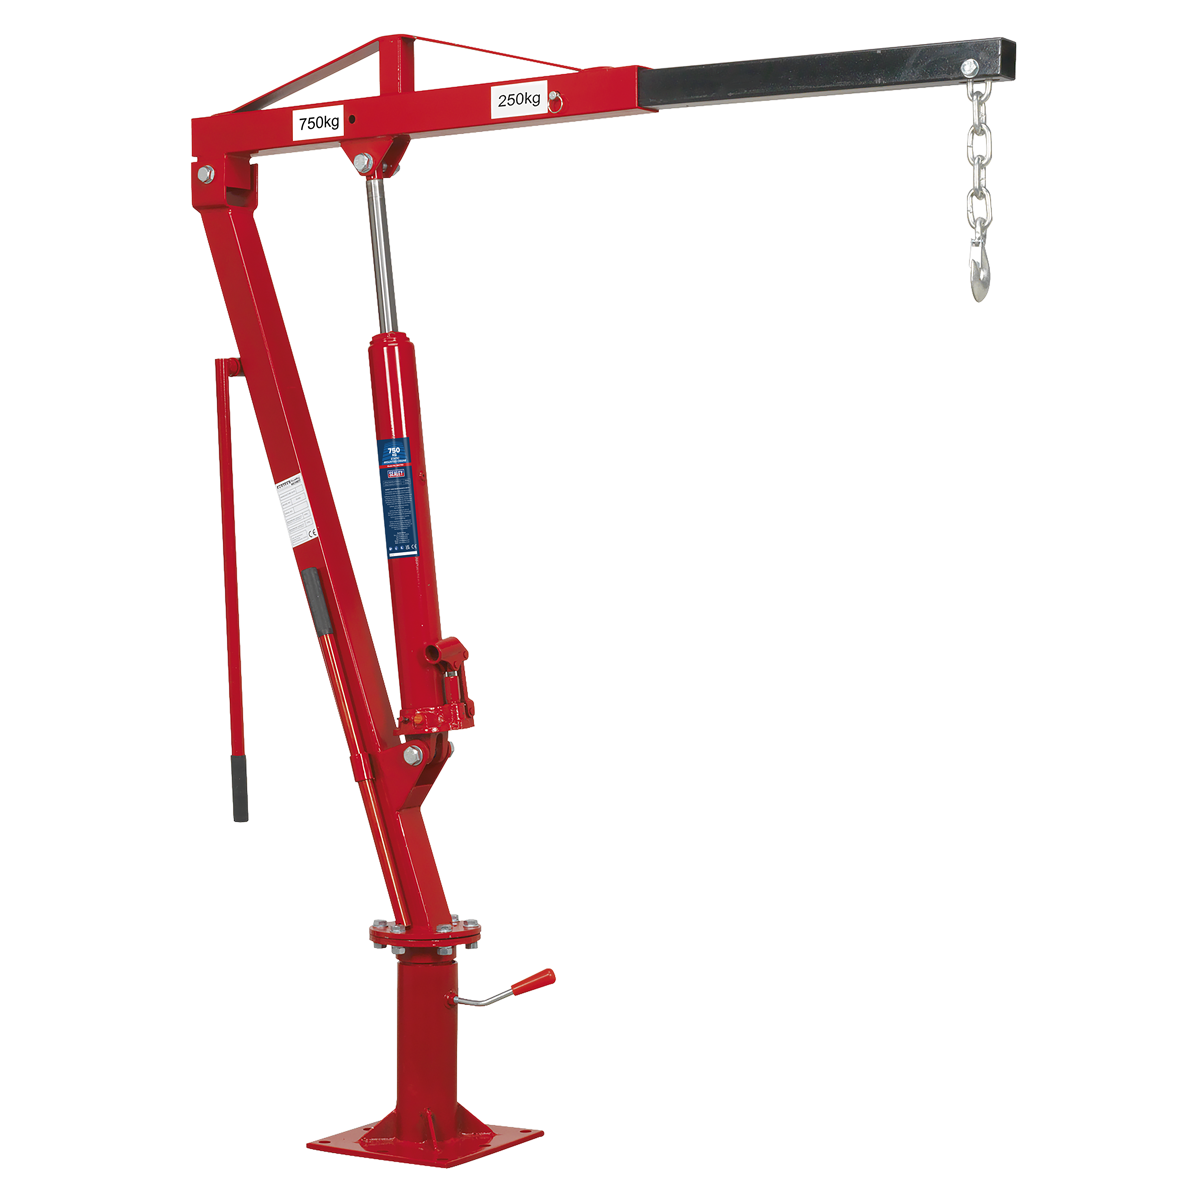 Static Mounted Crane with a capacity of  750kg